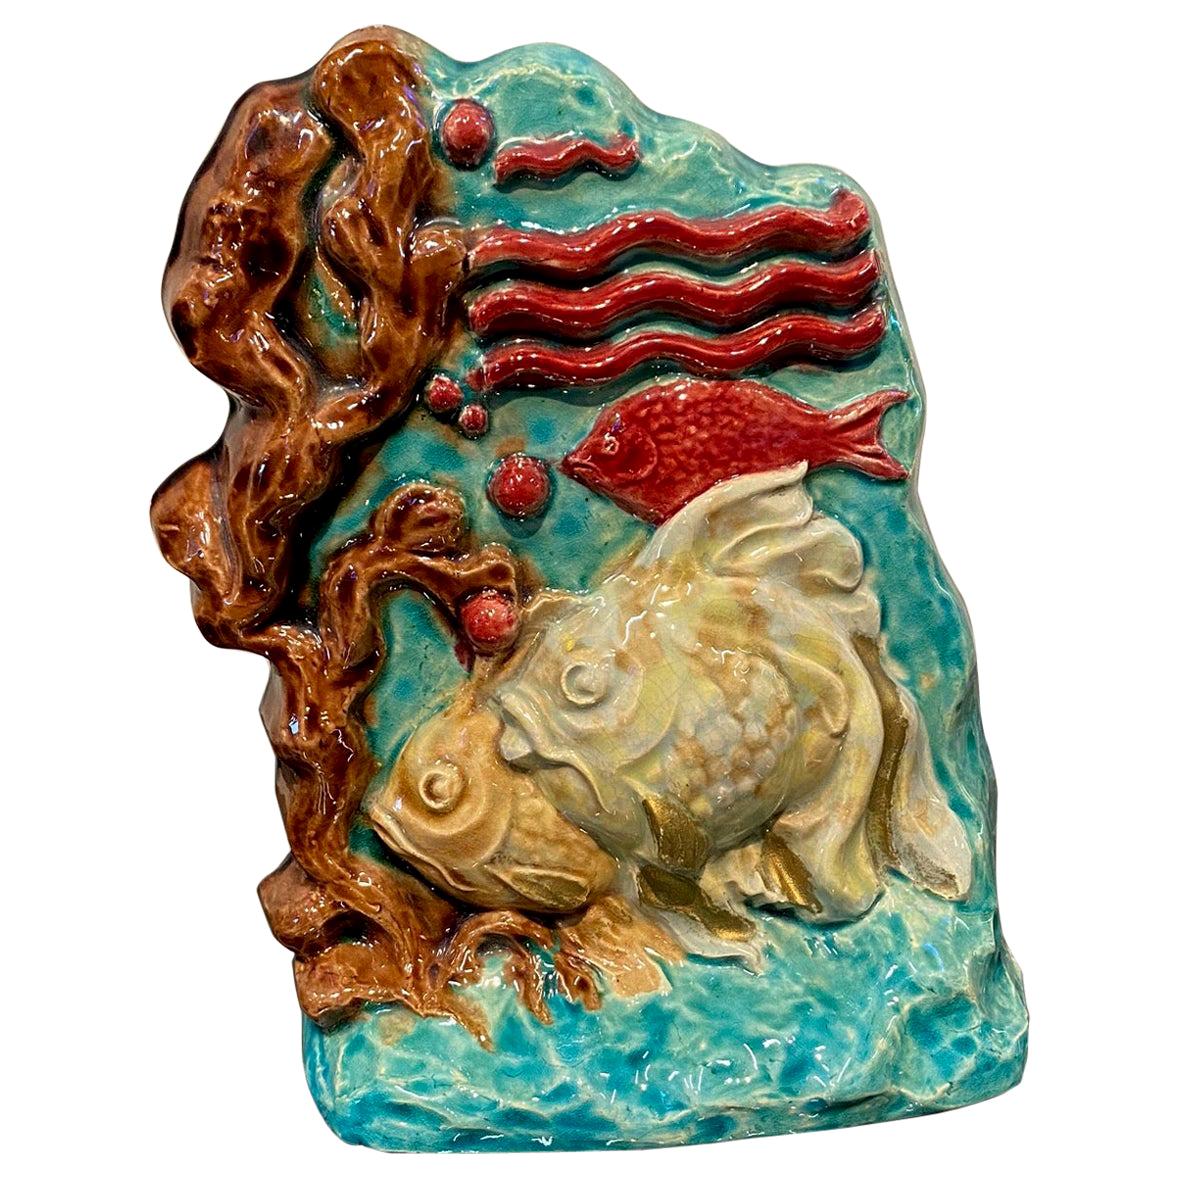 French Art Deco Ceramic Sculpture with Fishes, Glazed, 1920 by Susse Freres